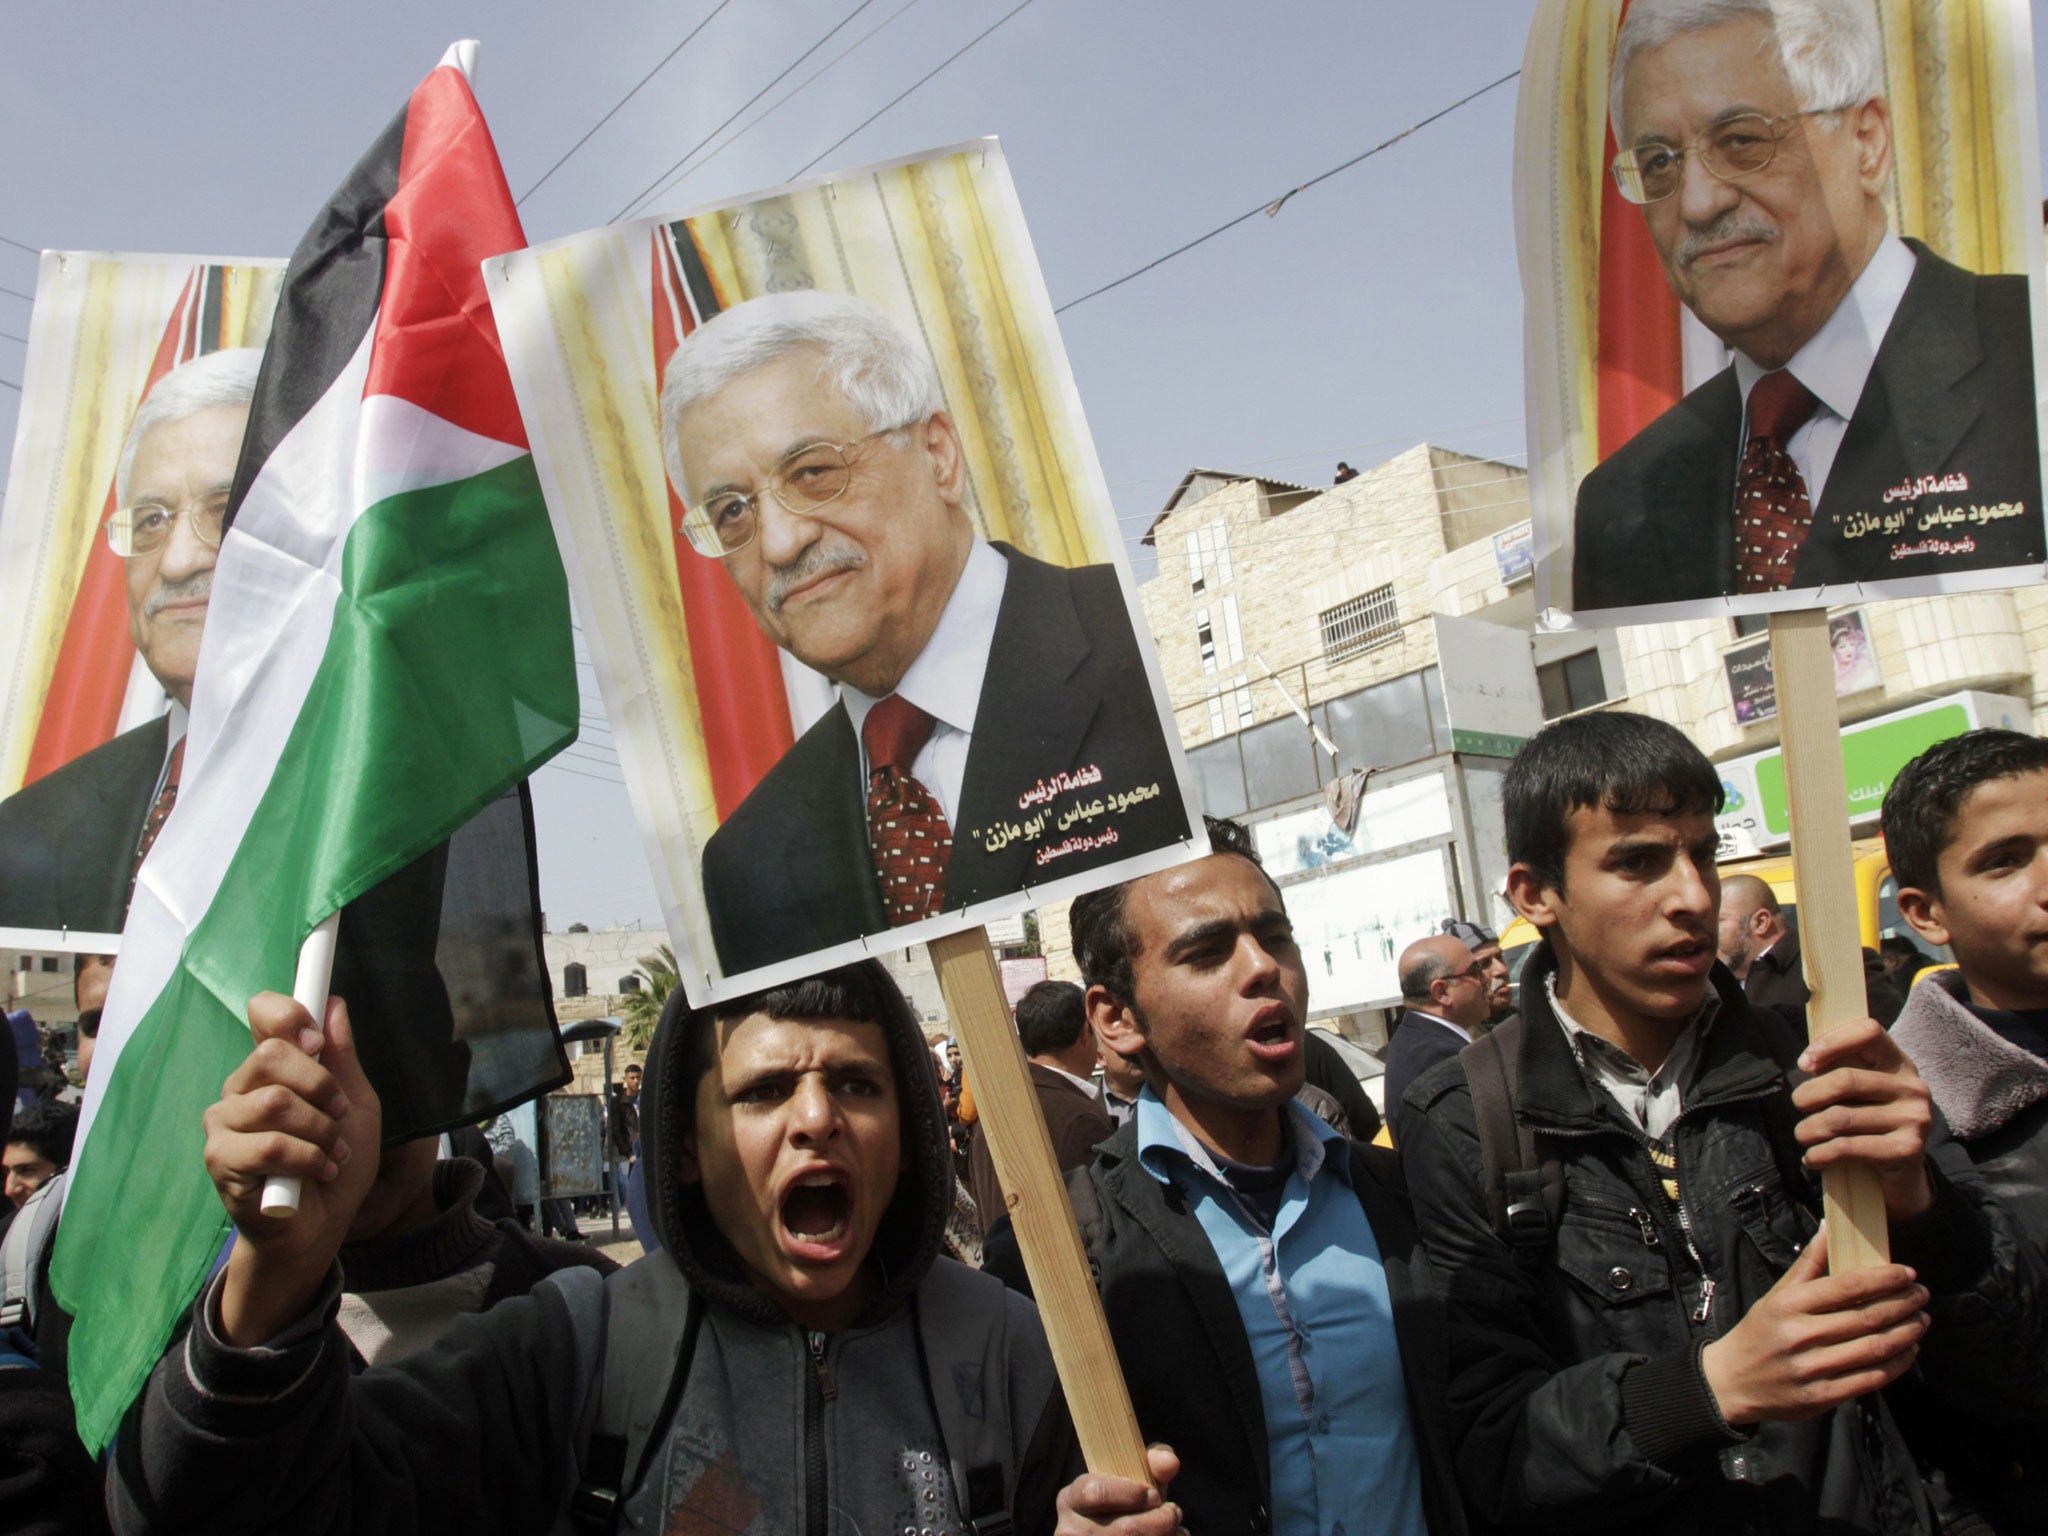 President Abbas’s Fatah supporters campaign for Palestinians’ right to a separate state in Tubas, in the West Bank